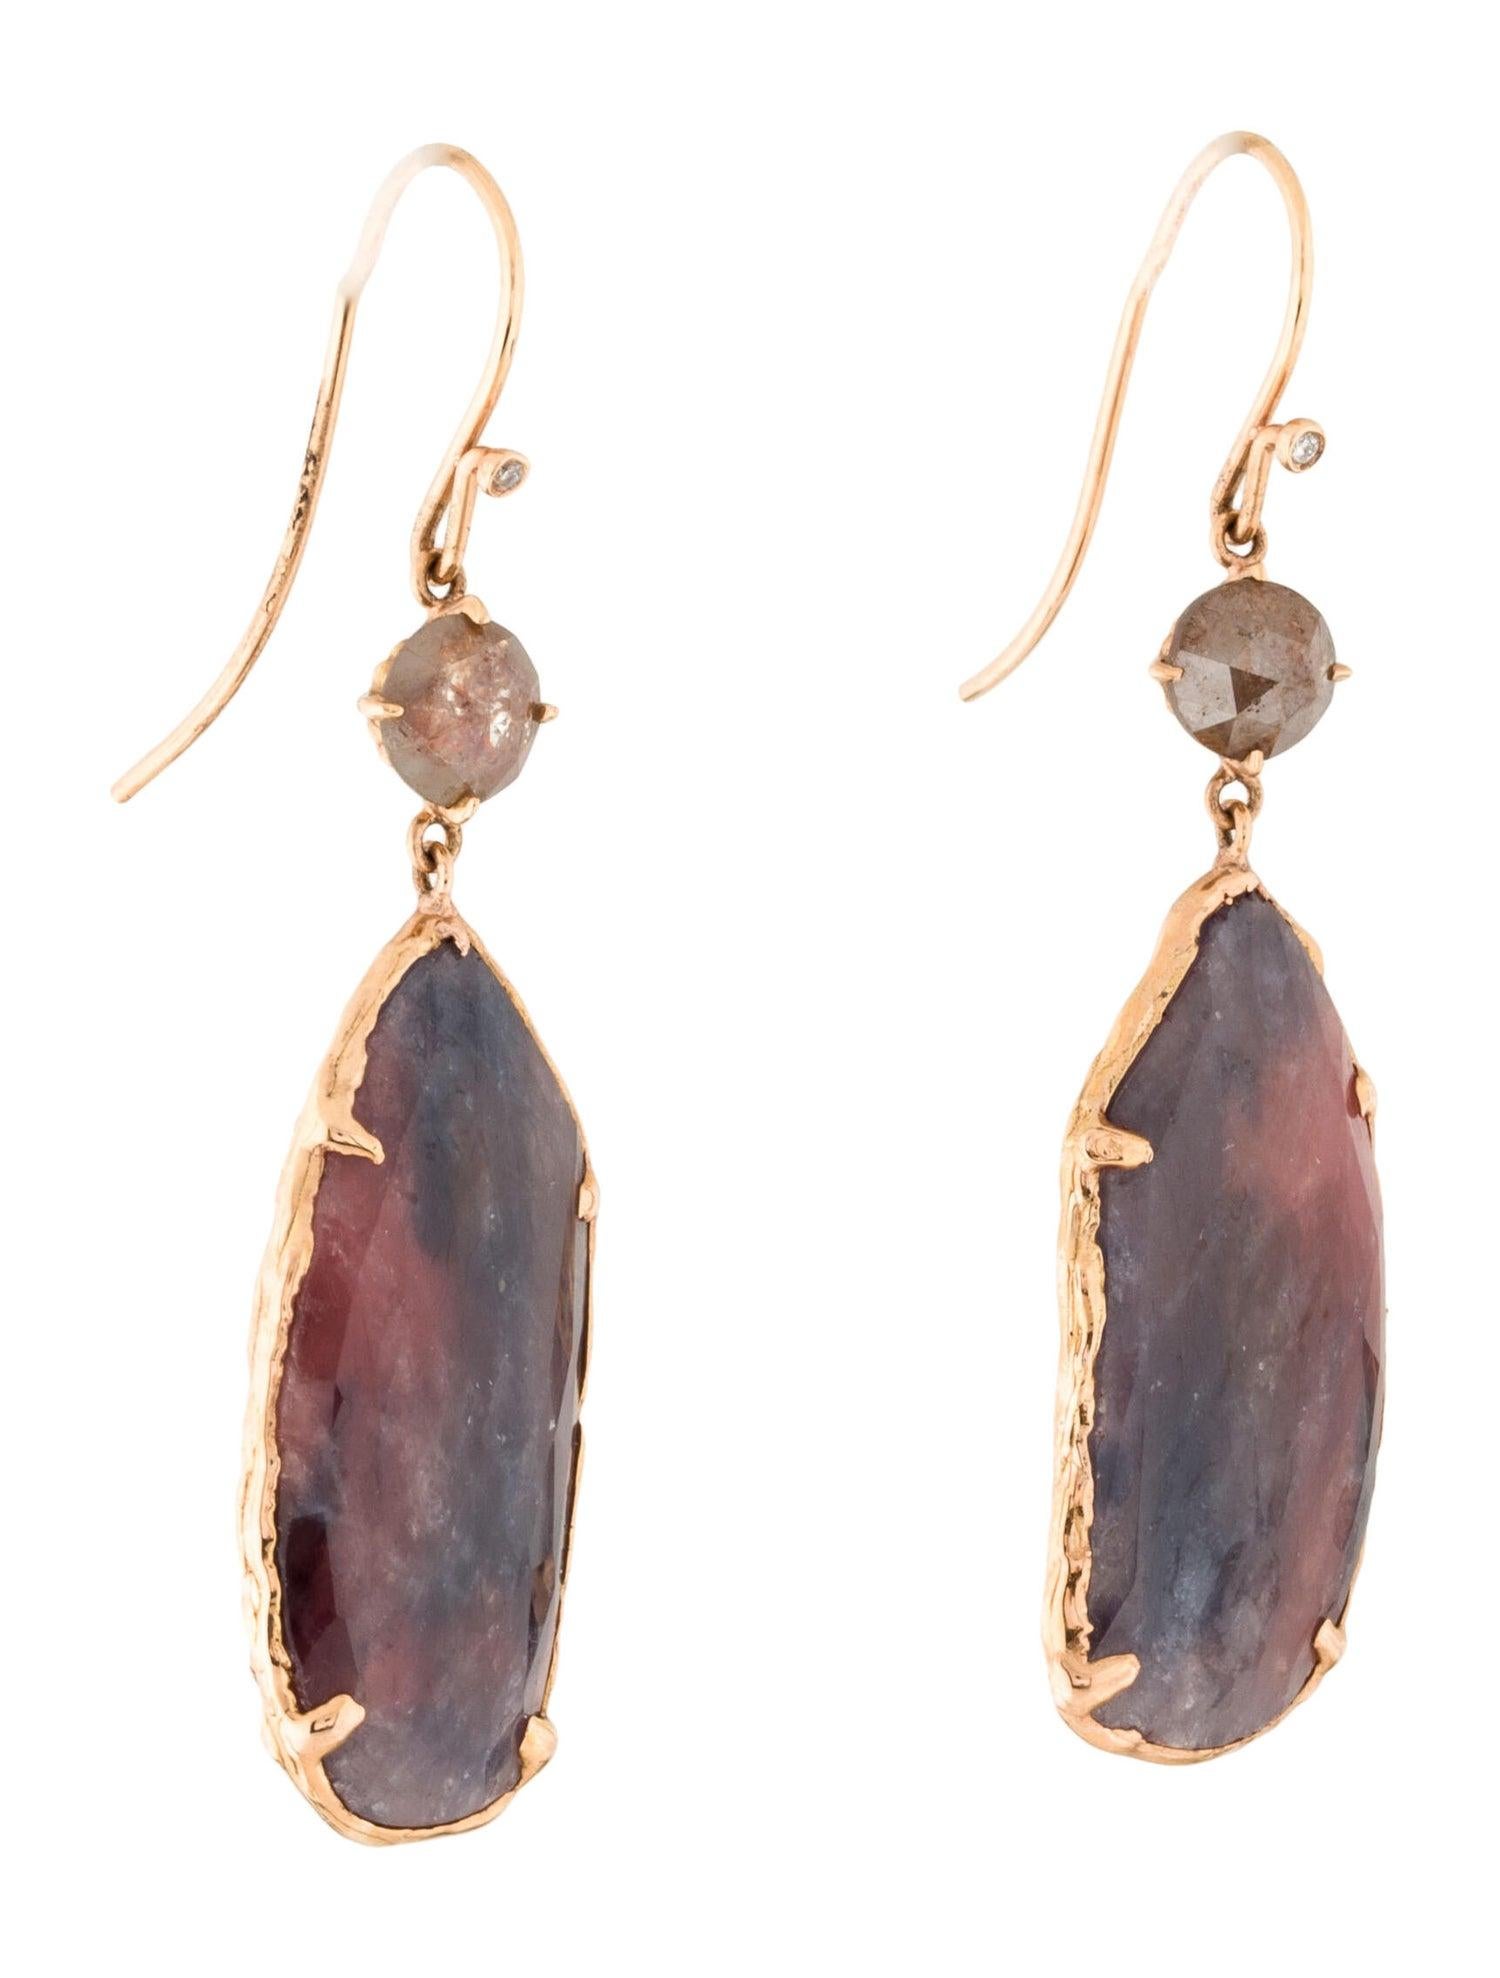  These stunning Sapphire Slice Dangle Earrings are a true masterpiece, crafted with 18 Karat Rose Gold. The intricate design showcases a round brilliant rustic diamond and a unique free form Sapphire Slice, adding an element of individuality to the